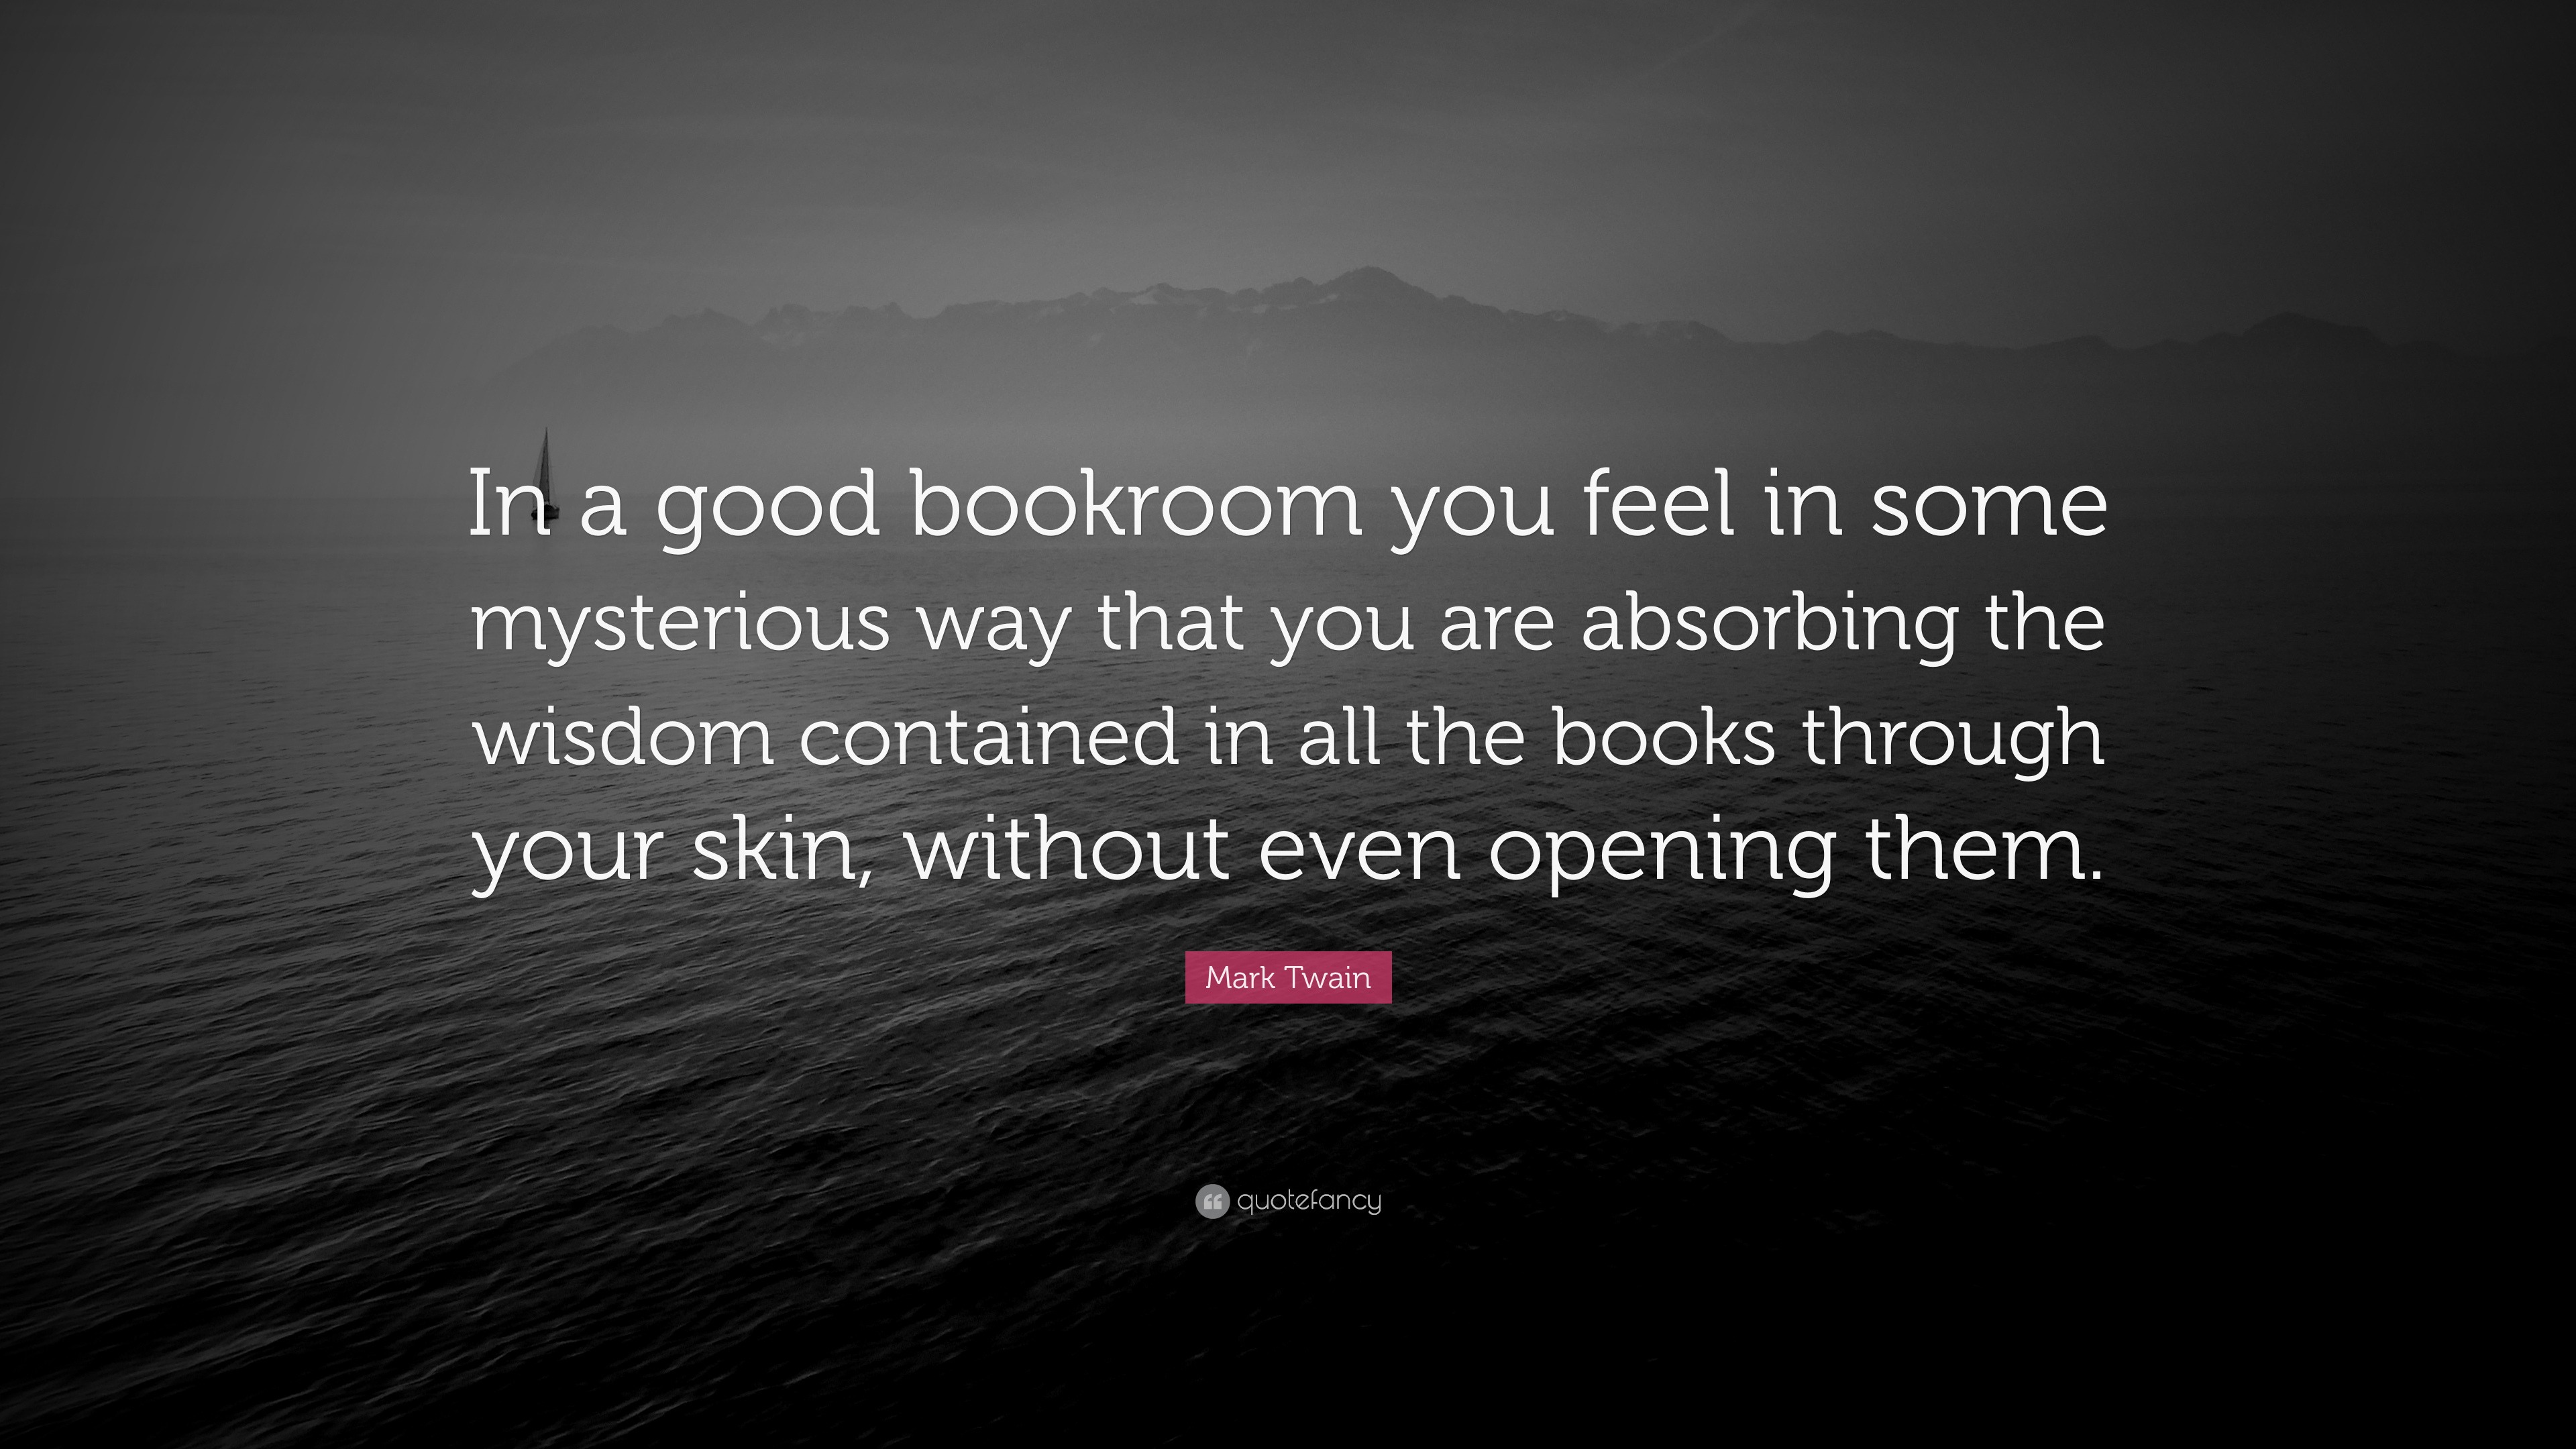 Mark Twain In a good bookroom you feel in some mysterious way that you are ...